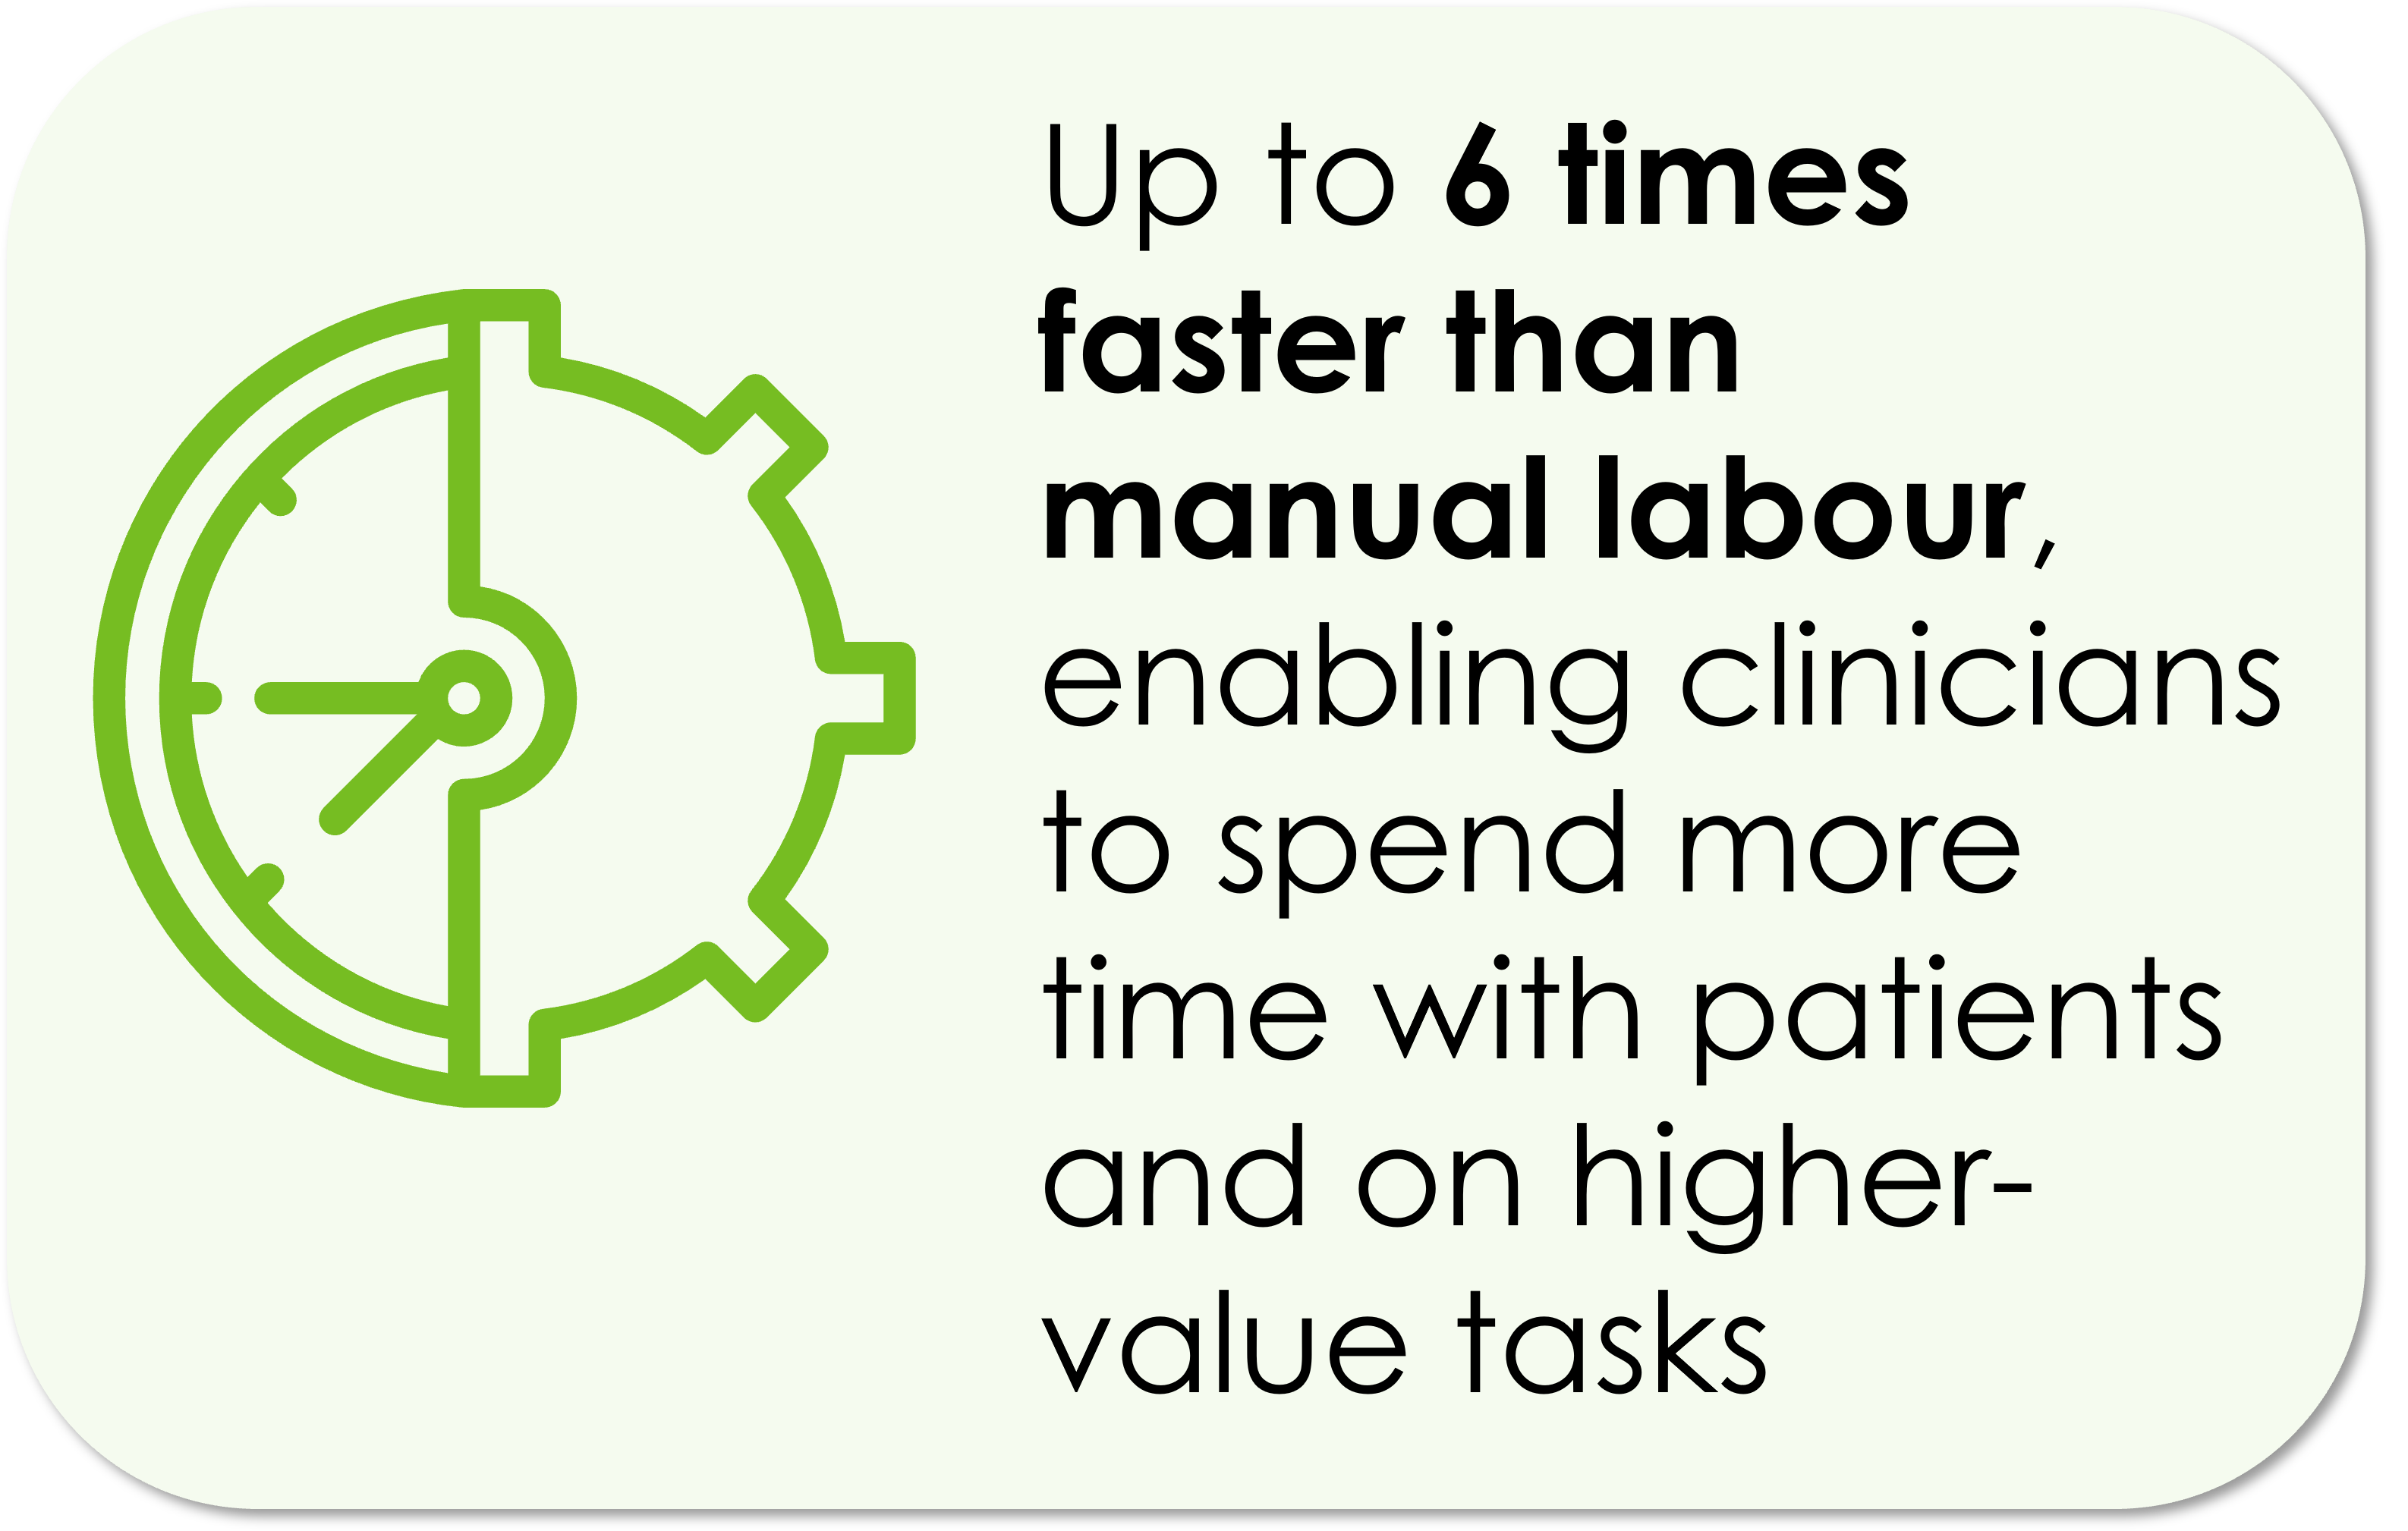 Up to 6 times faster than manual labour, enabling clinicians to spend more time with patients and on higher-value tasks